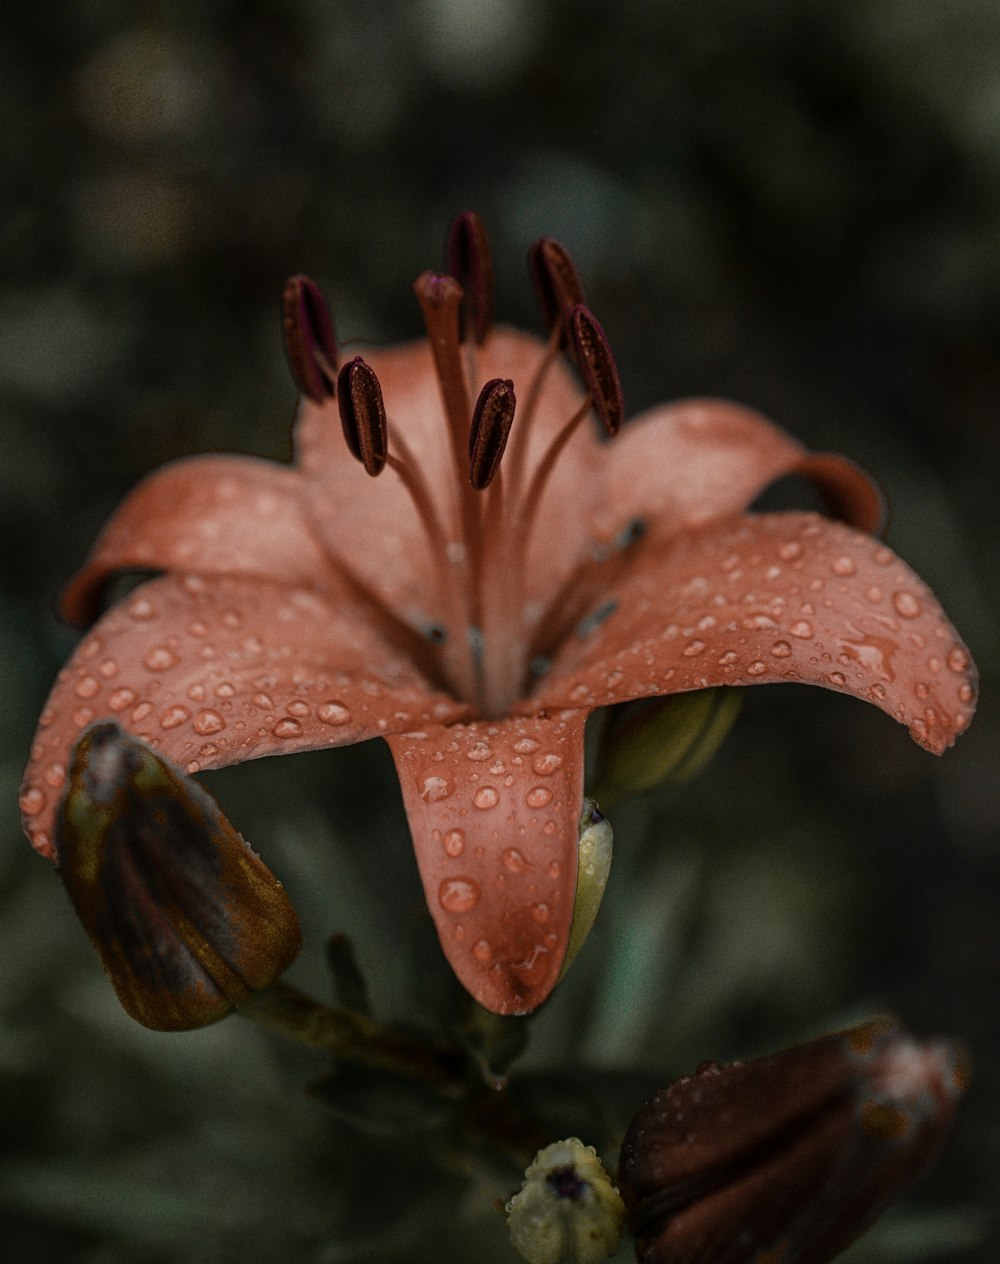 a close up of a flower with drops of water on it